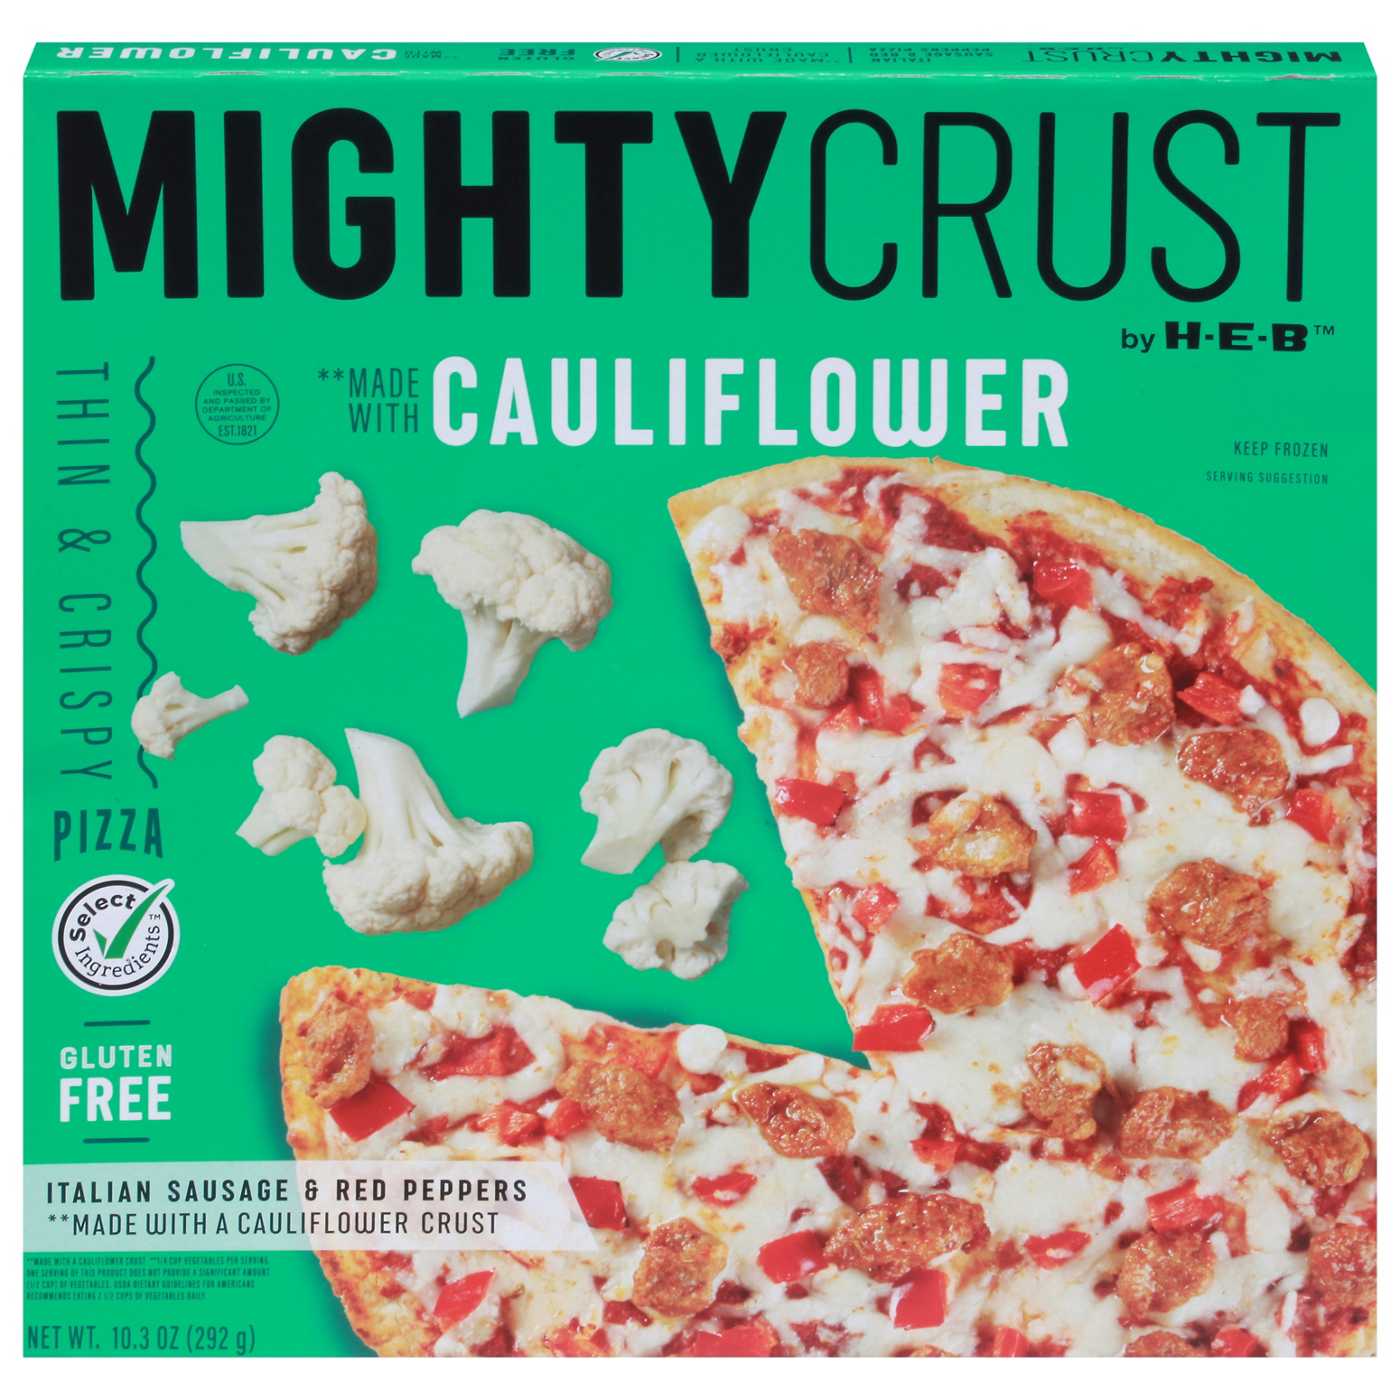 MightyCrust by H-E-B Frozen Cauliflower Pizza - Italian Sausage & Red Peppers; image 1 of 2